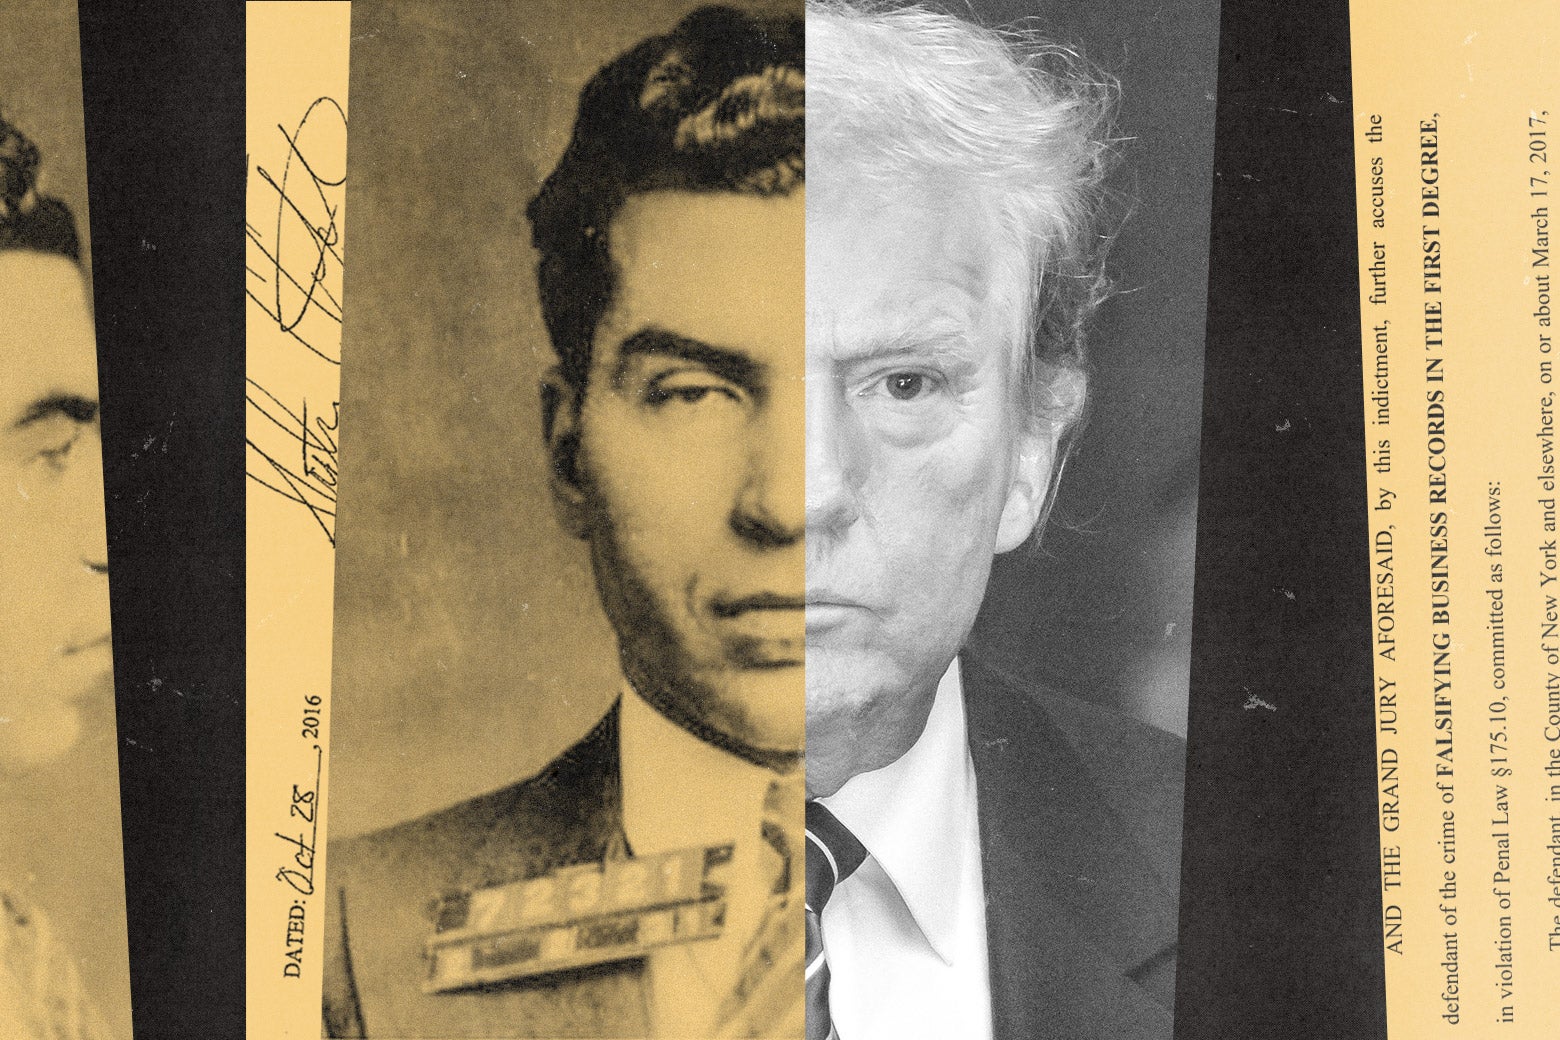 This 1938 Mob Case Has Some Mind-Boggling Parallels to the Trump Hush Money Trial